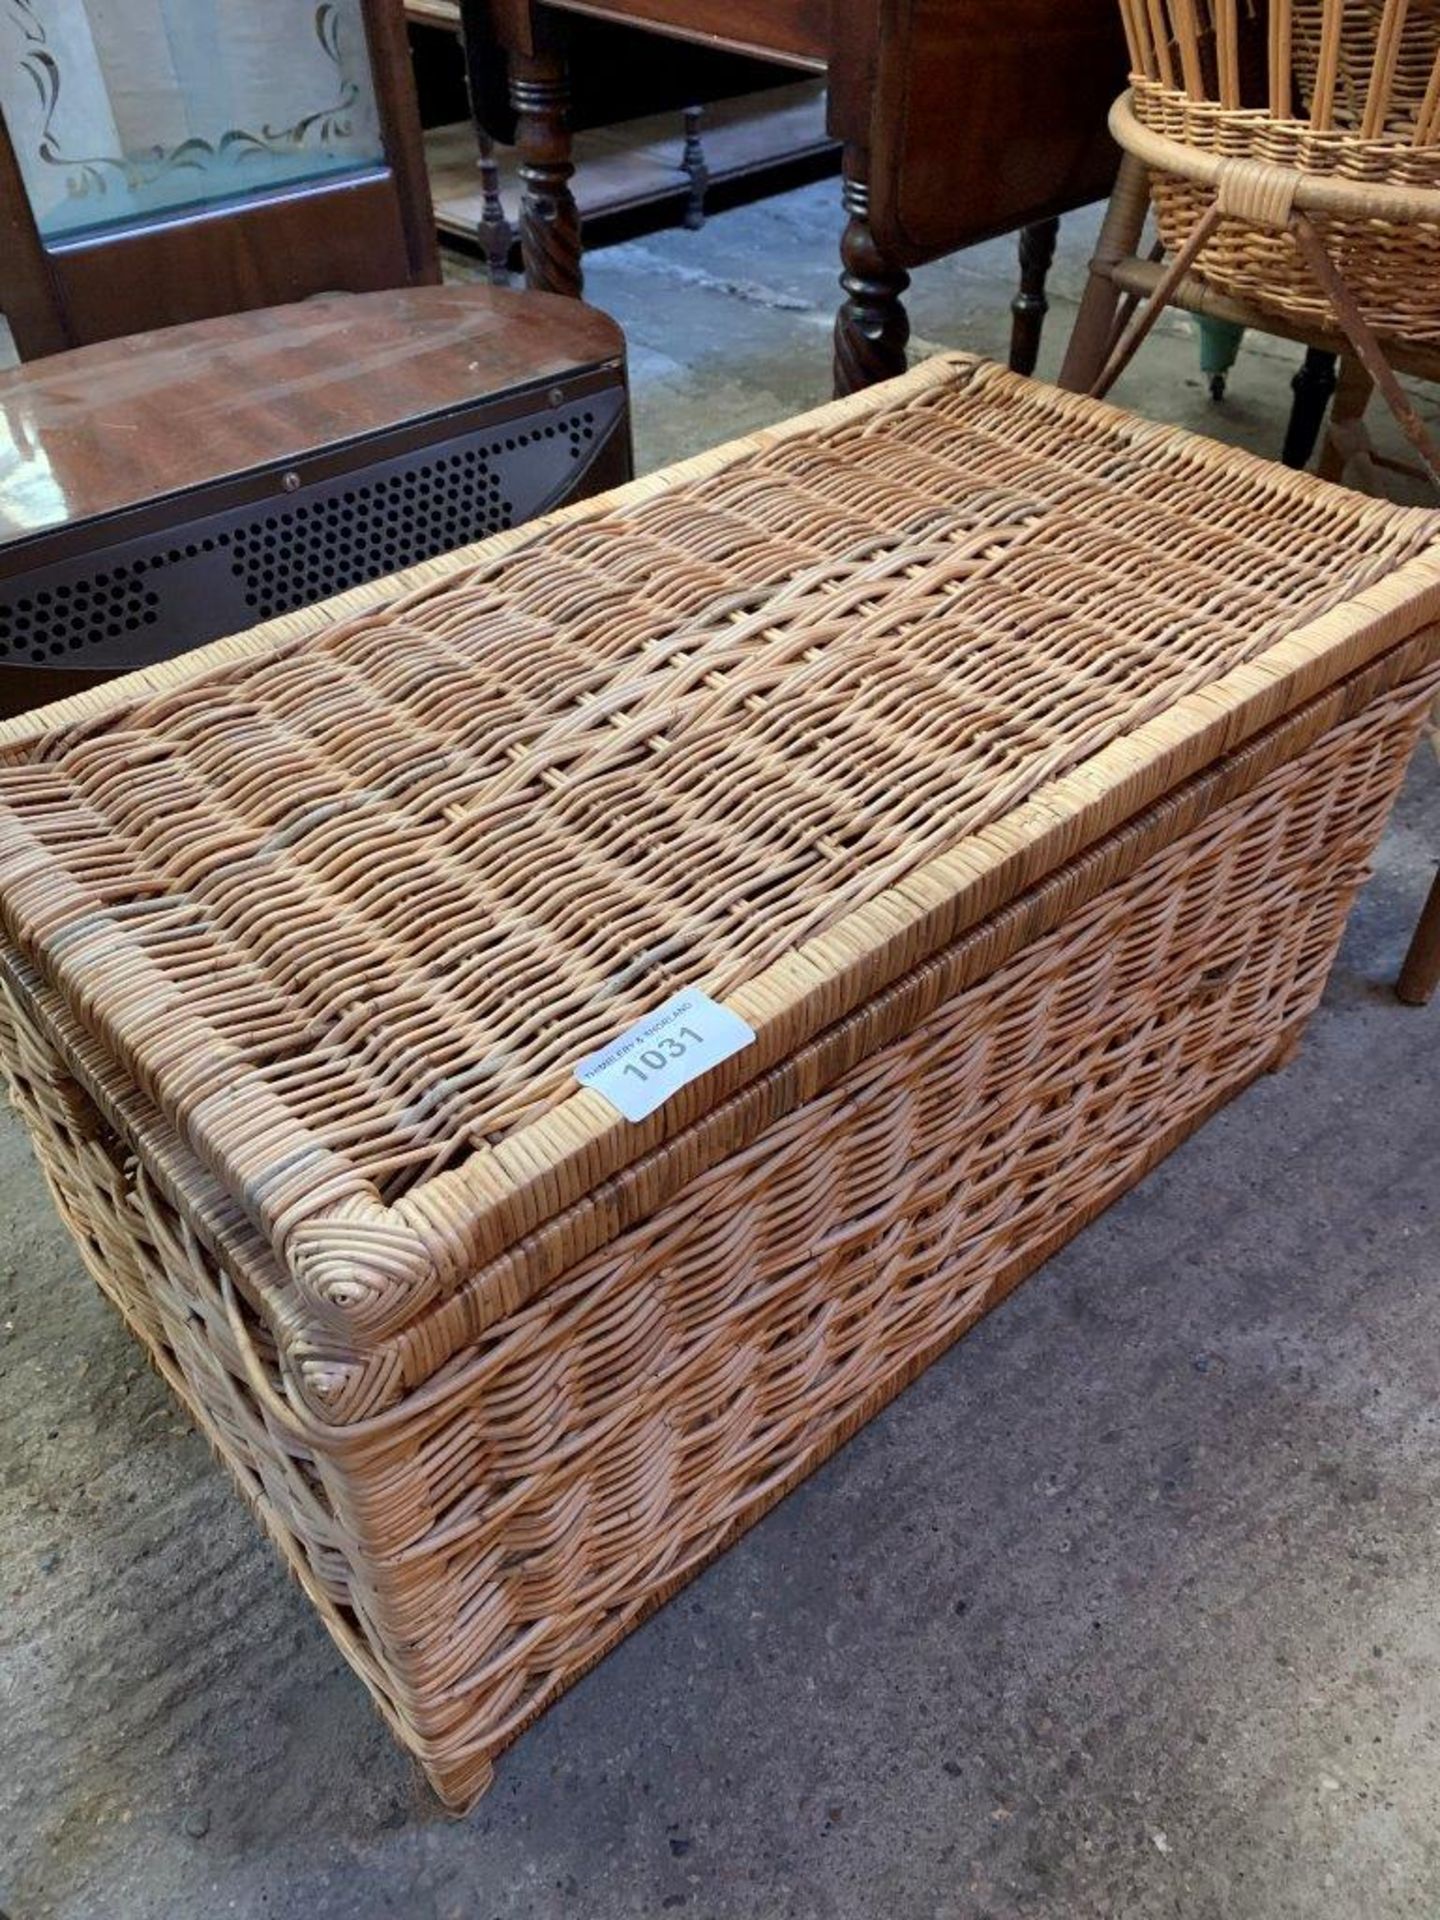 Wicker chest, crib and four baskets. - Image 2 of 2